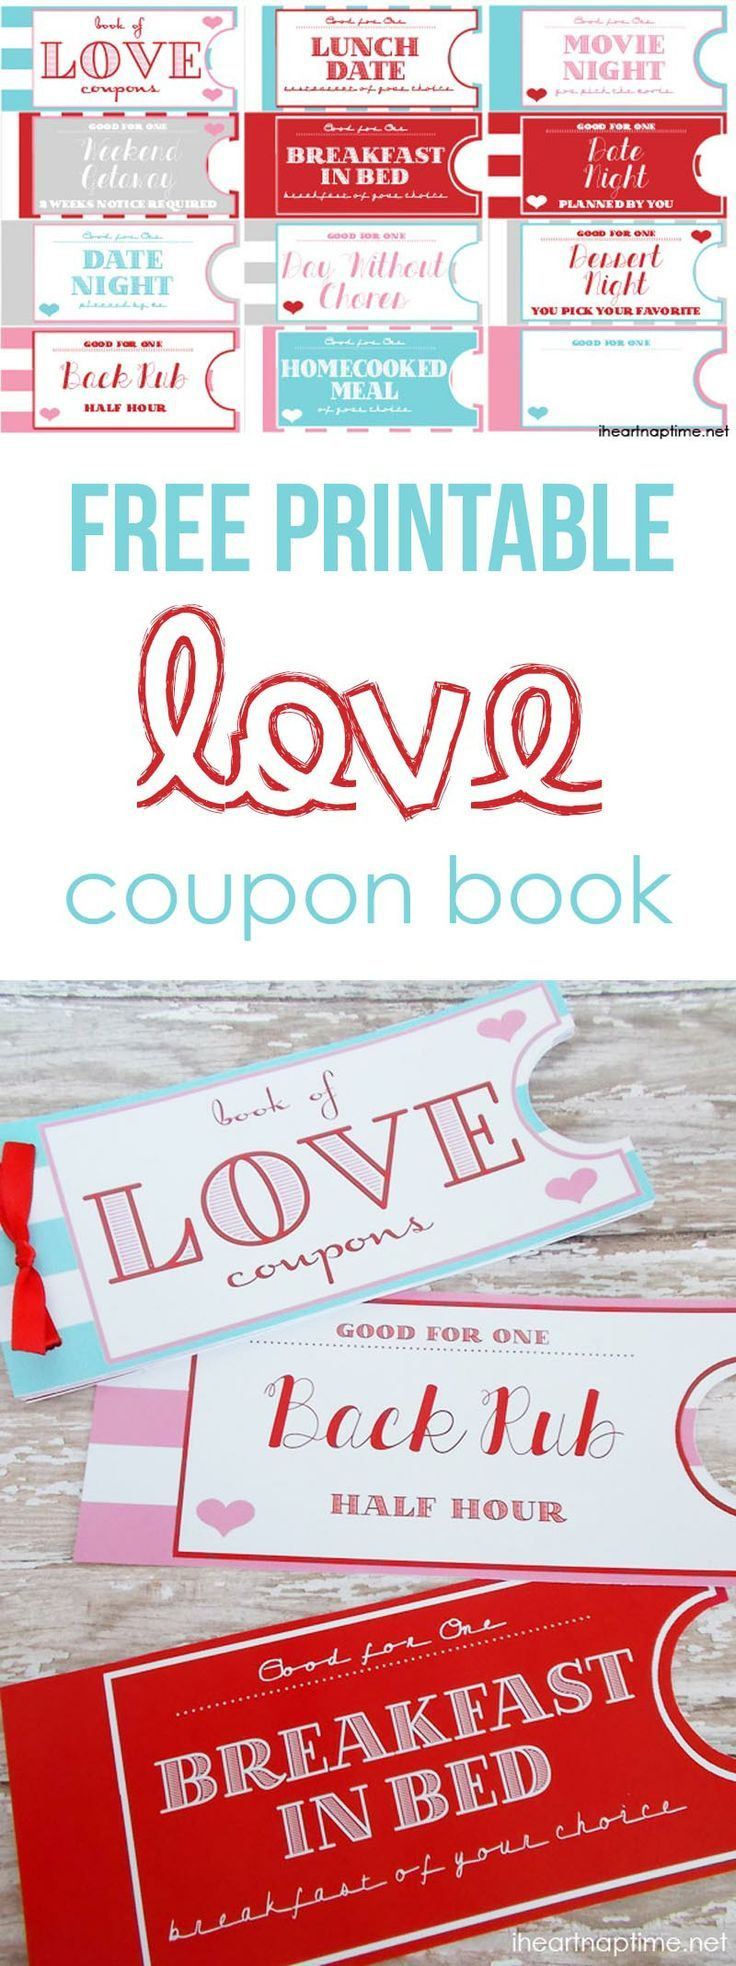 Free Gift Ideas For Boyfriend
 Free printable love coupon book on iheartnaptime